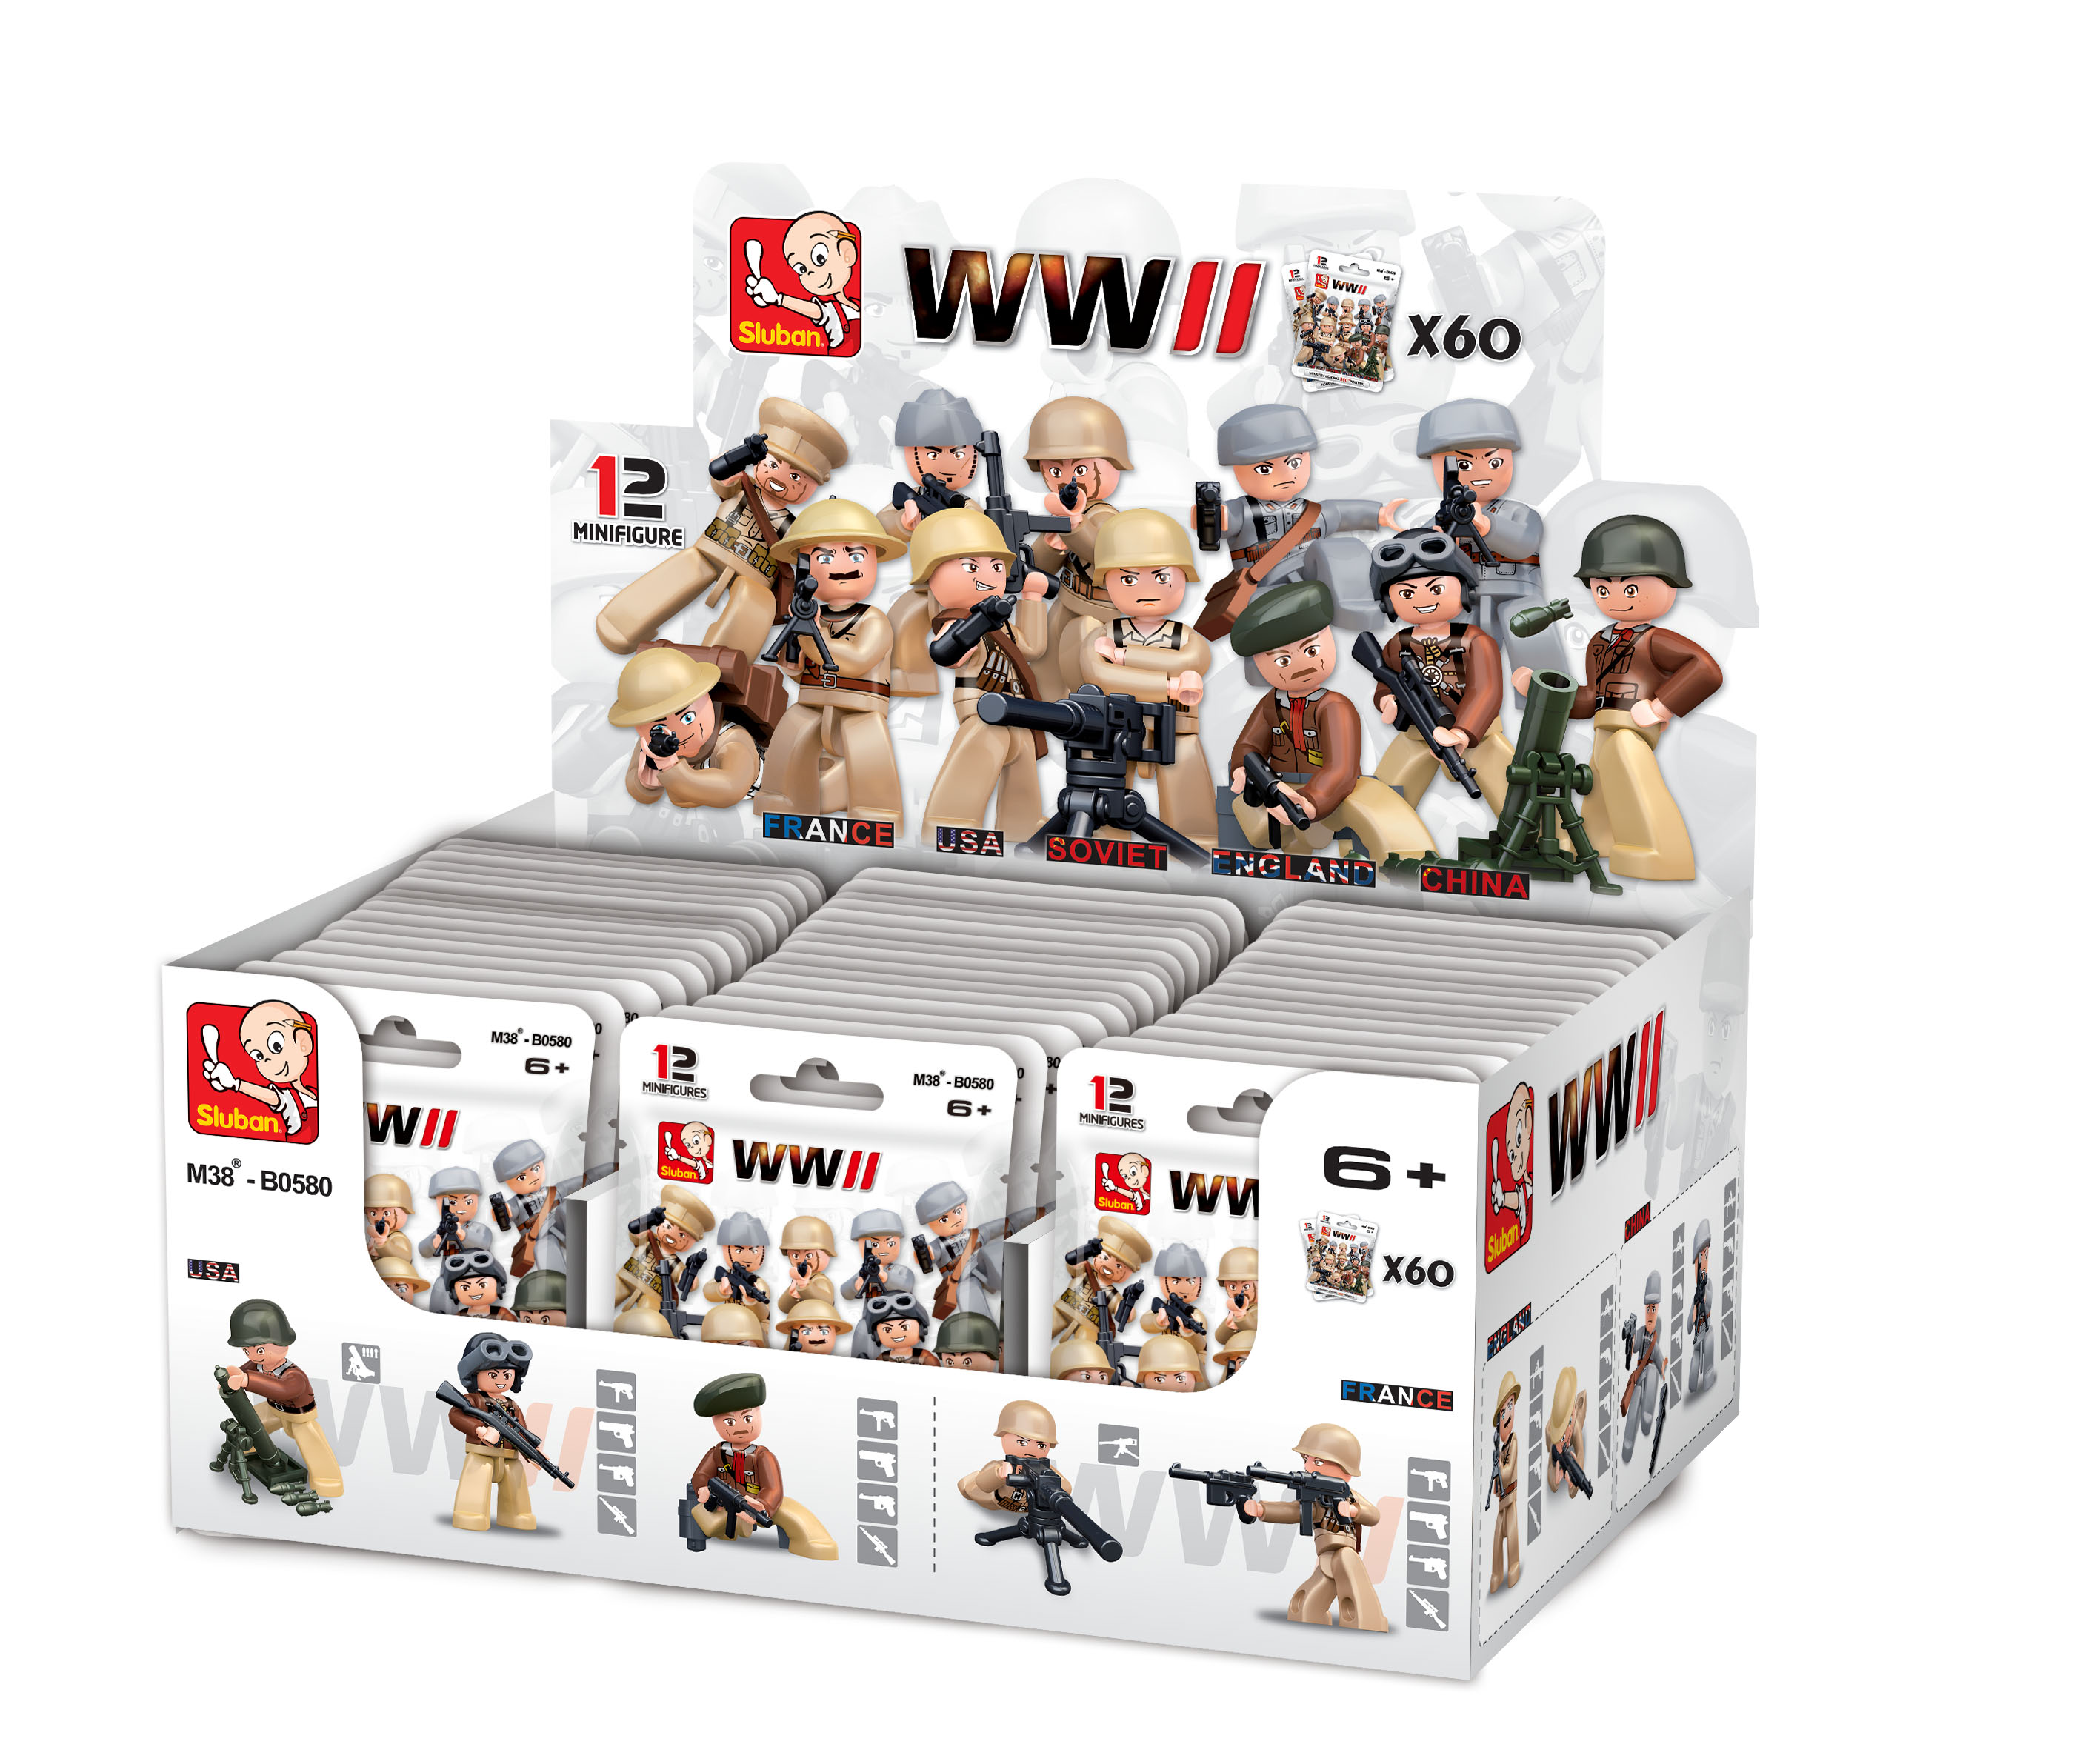 Sluban WWII Soldiers Display with 60 polybags